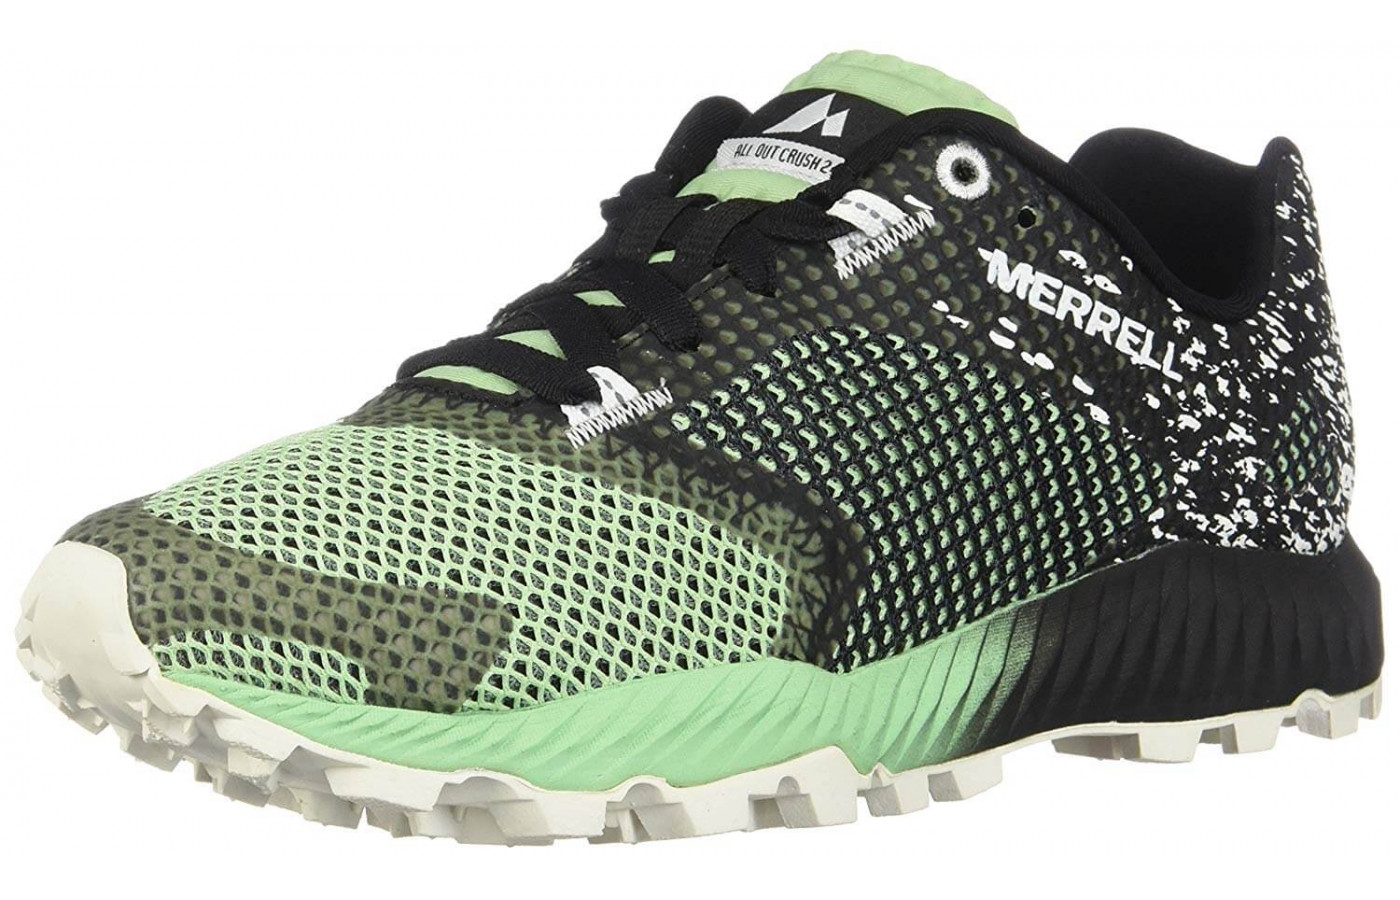 The All Out Crush 2 is available in green and grey for both men and women